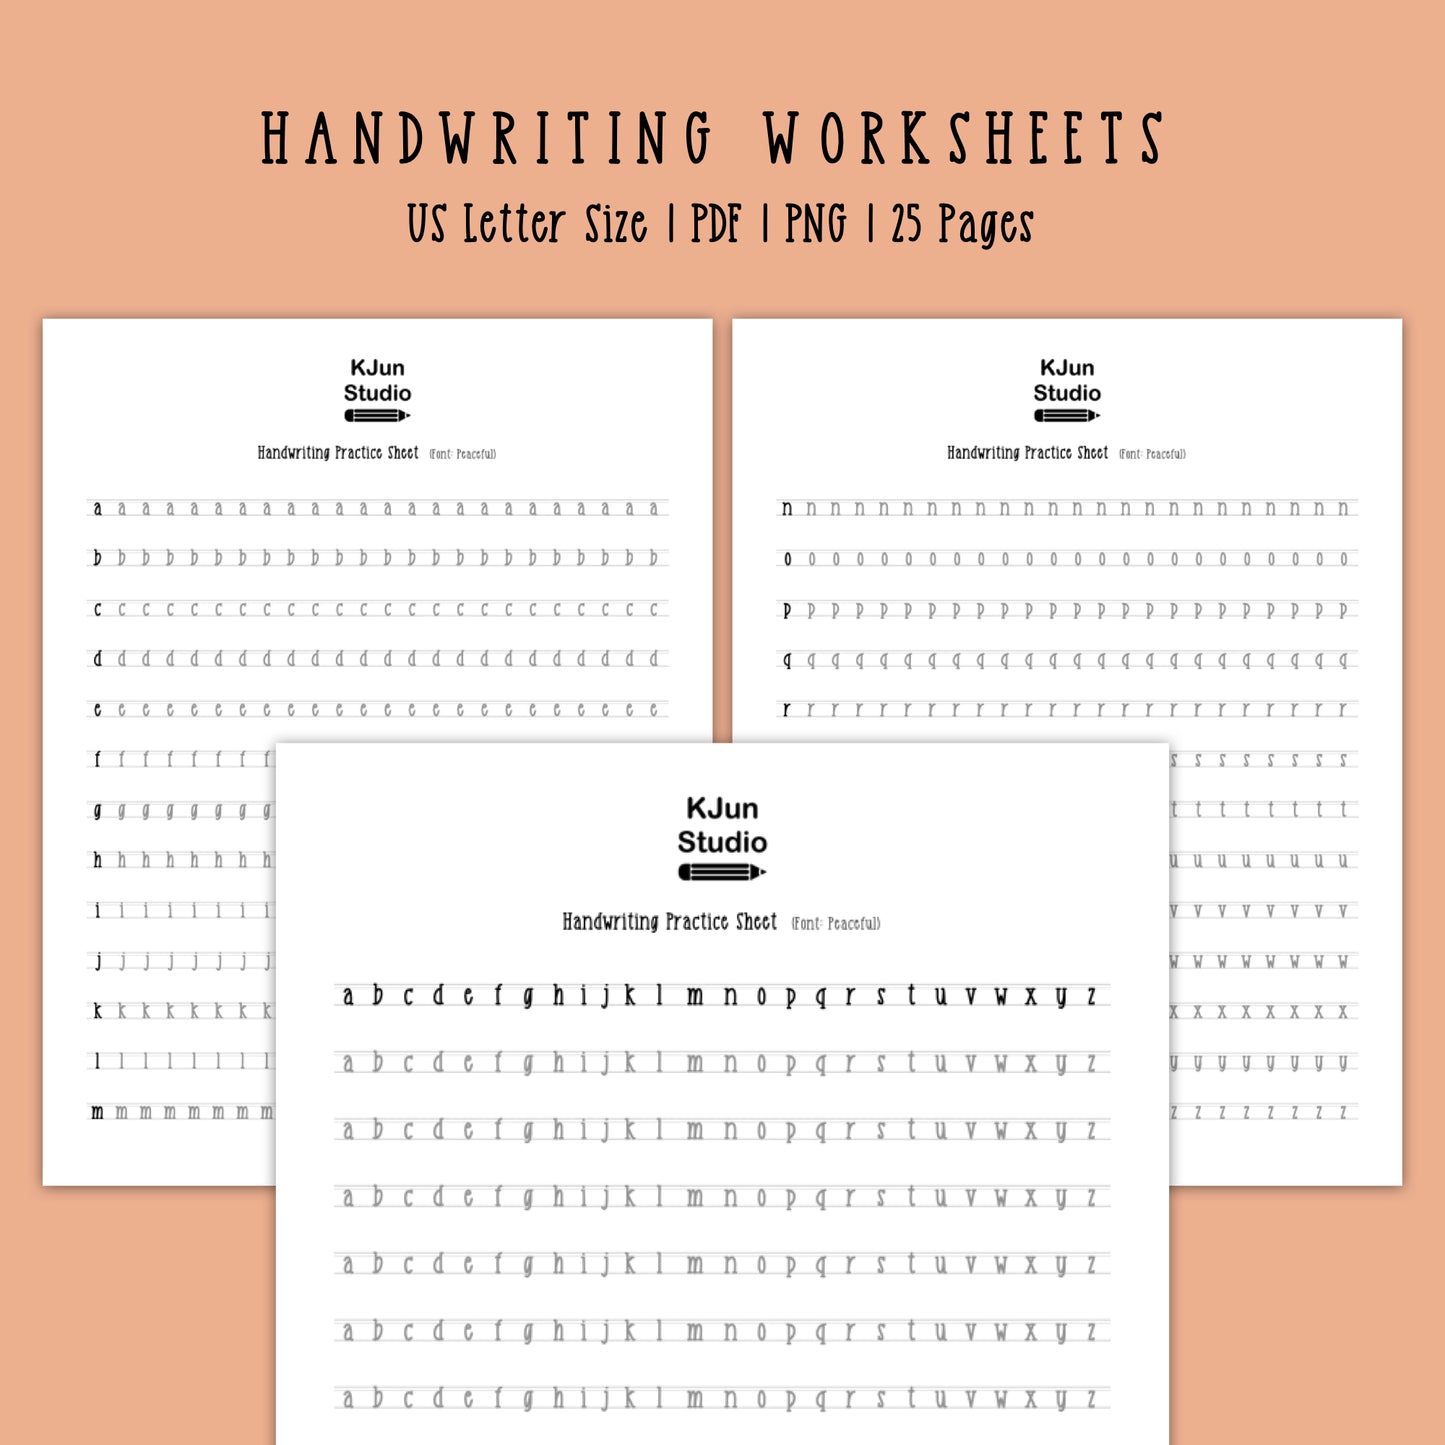 Handwriting Practice Sheets - Peaceful Font